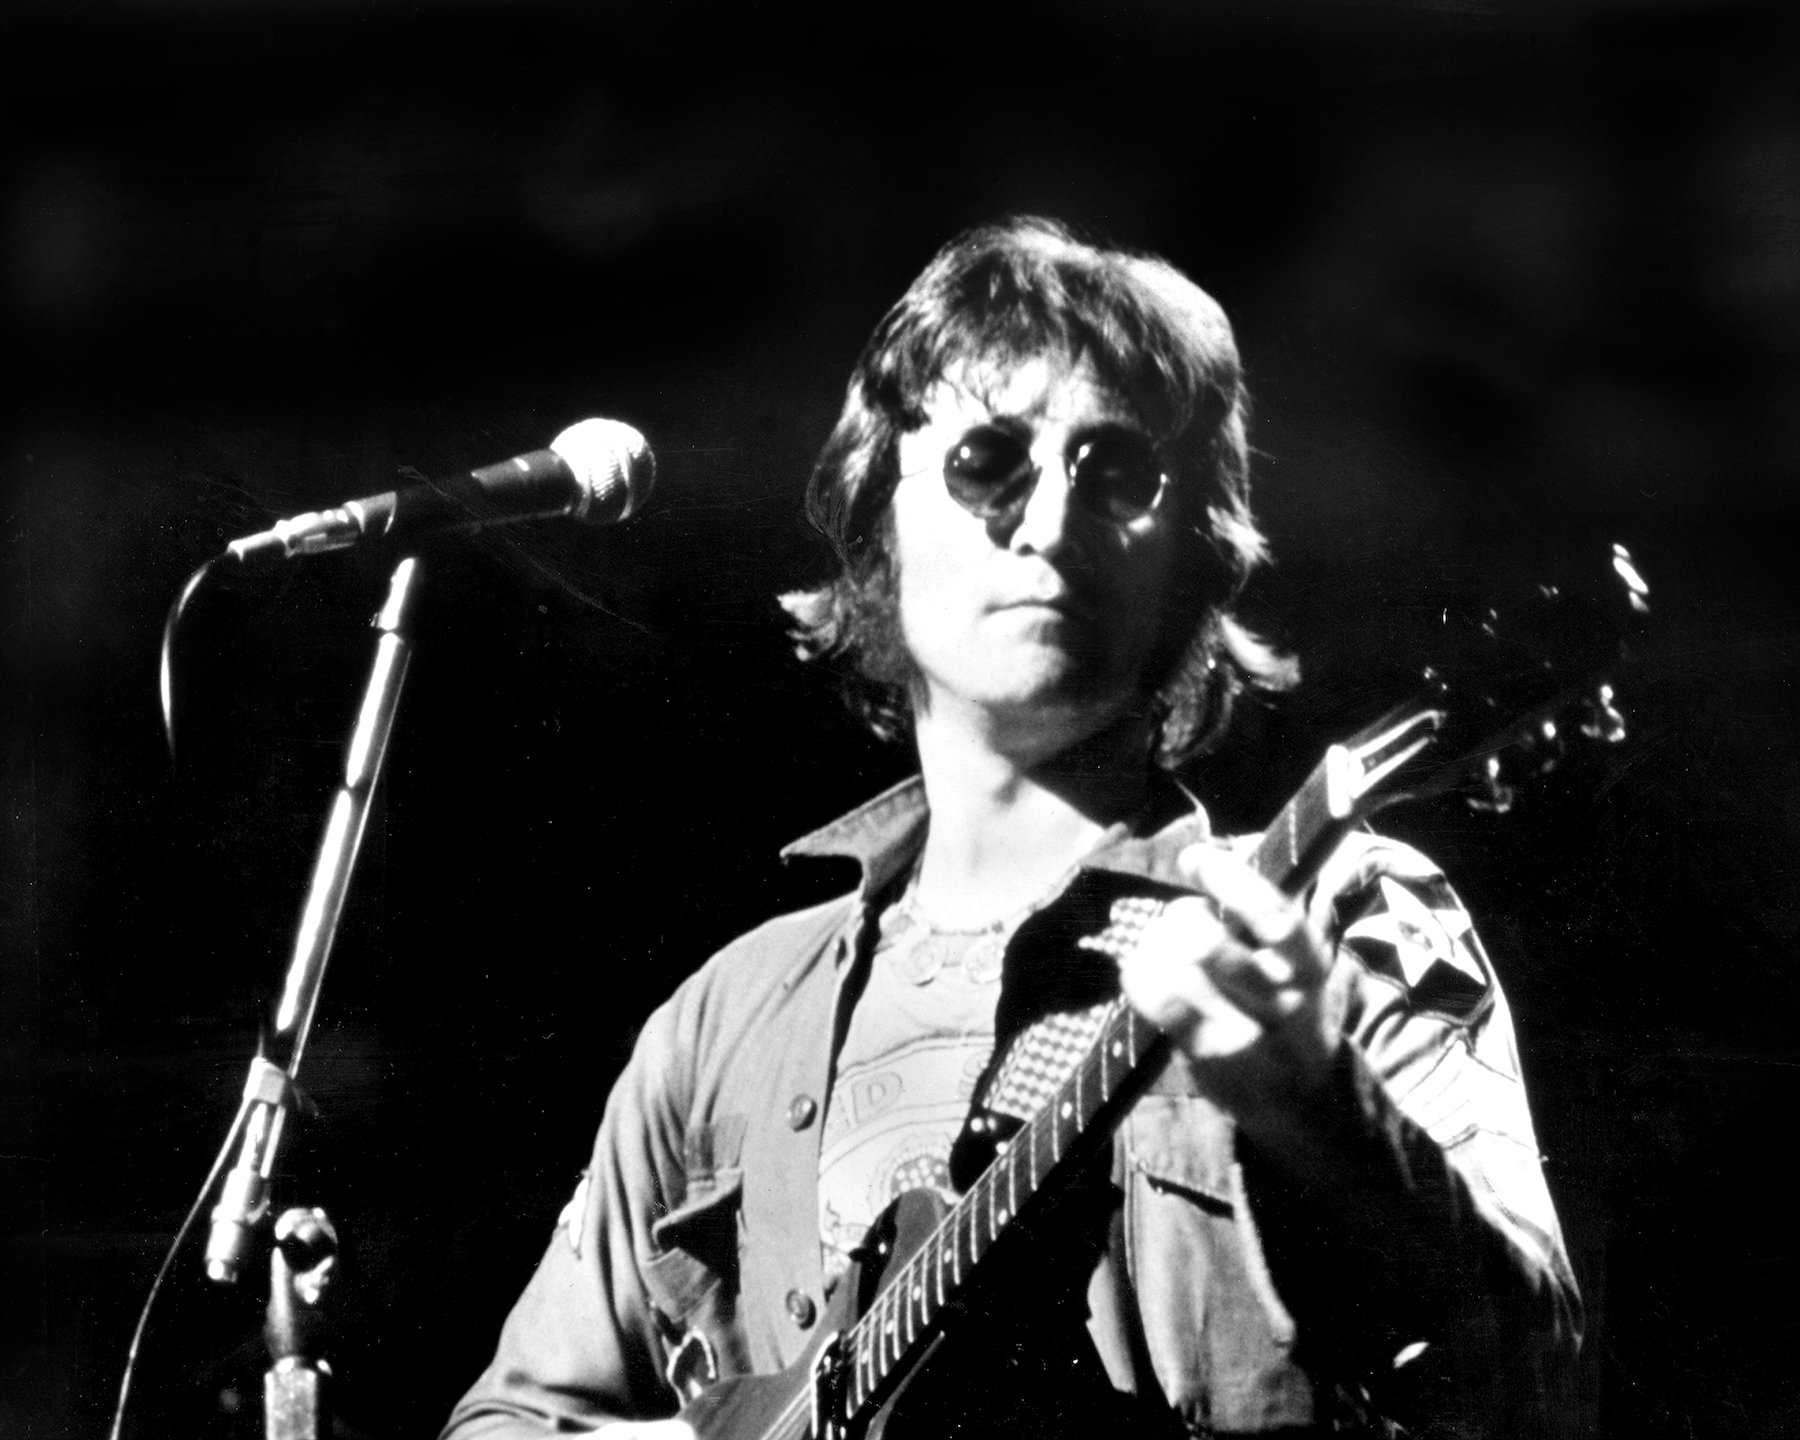 John Lennon, whose parents met in an interesting way, playing guitar